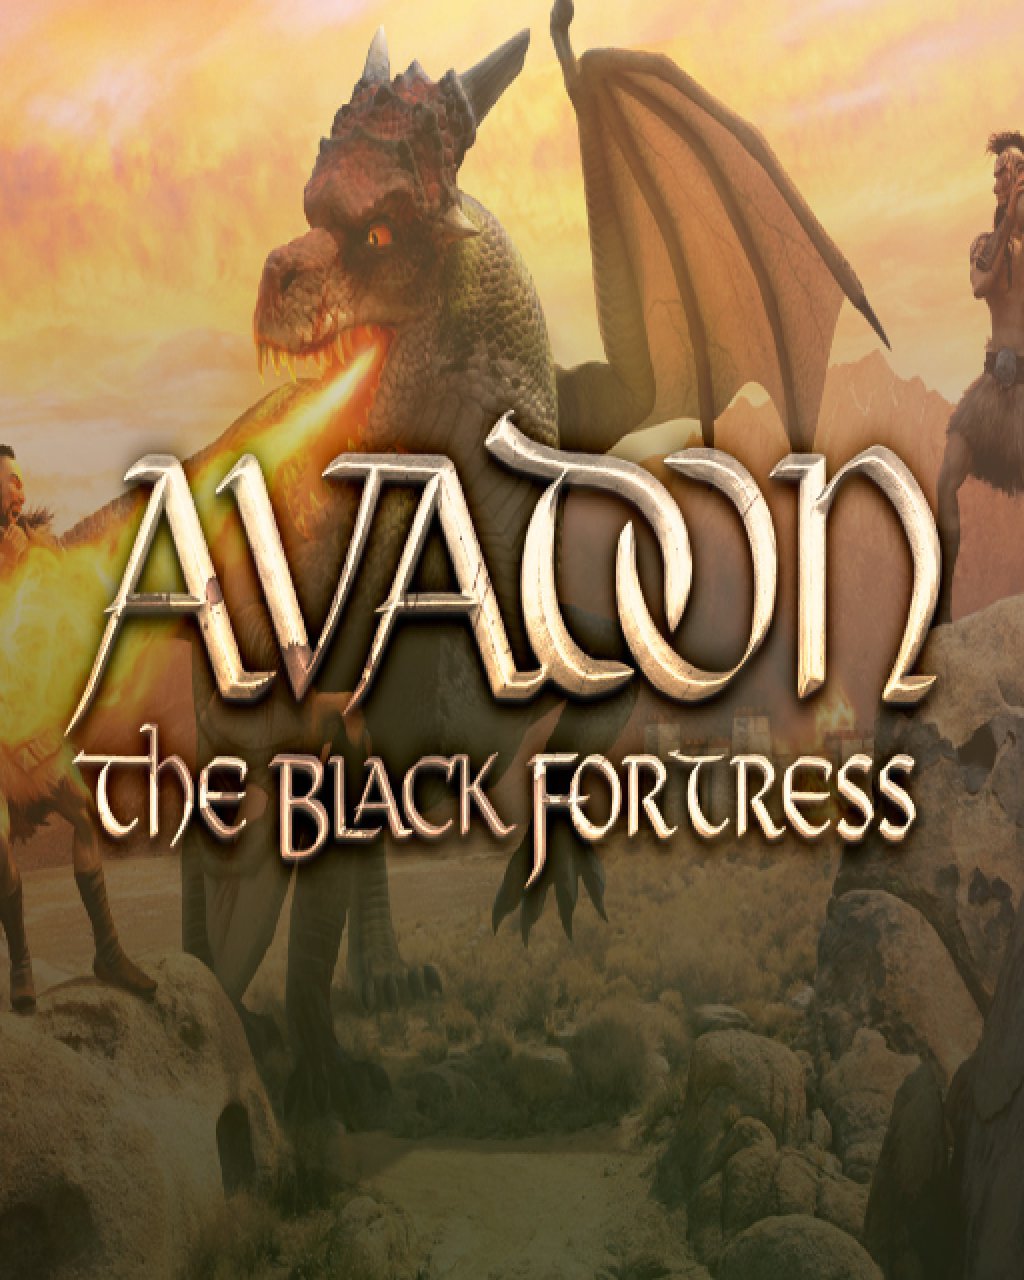 Avadon The Black Fortress